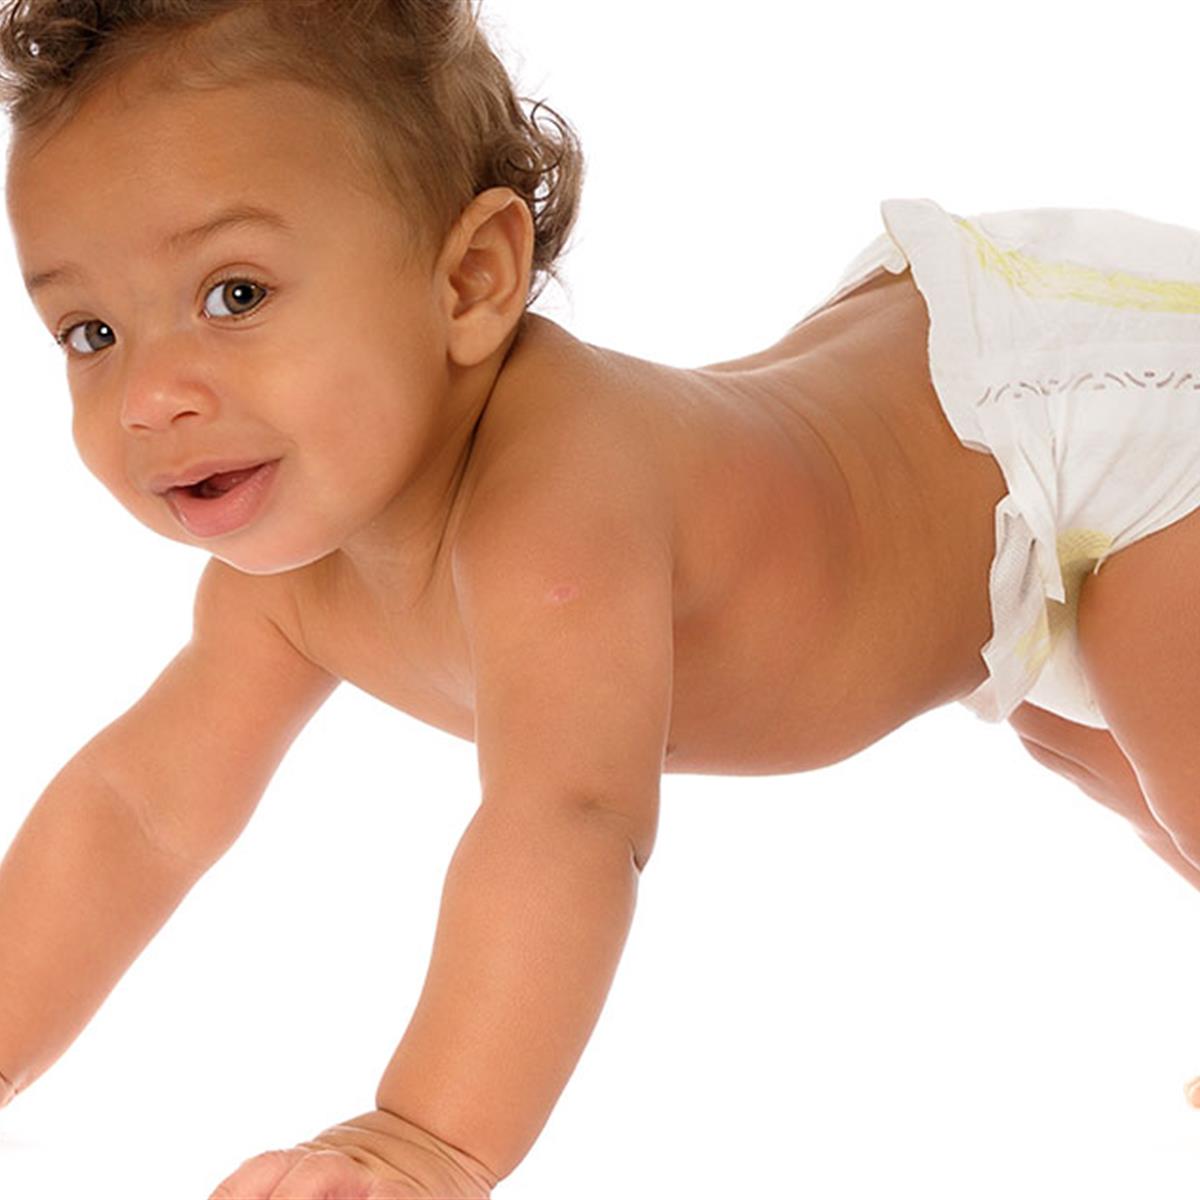 https://www.healthychildren.org/SiteCollectionImagesArticleImages/baby-doing-a-press-up-learning-to-crawl.jpg?RenditionID=6